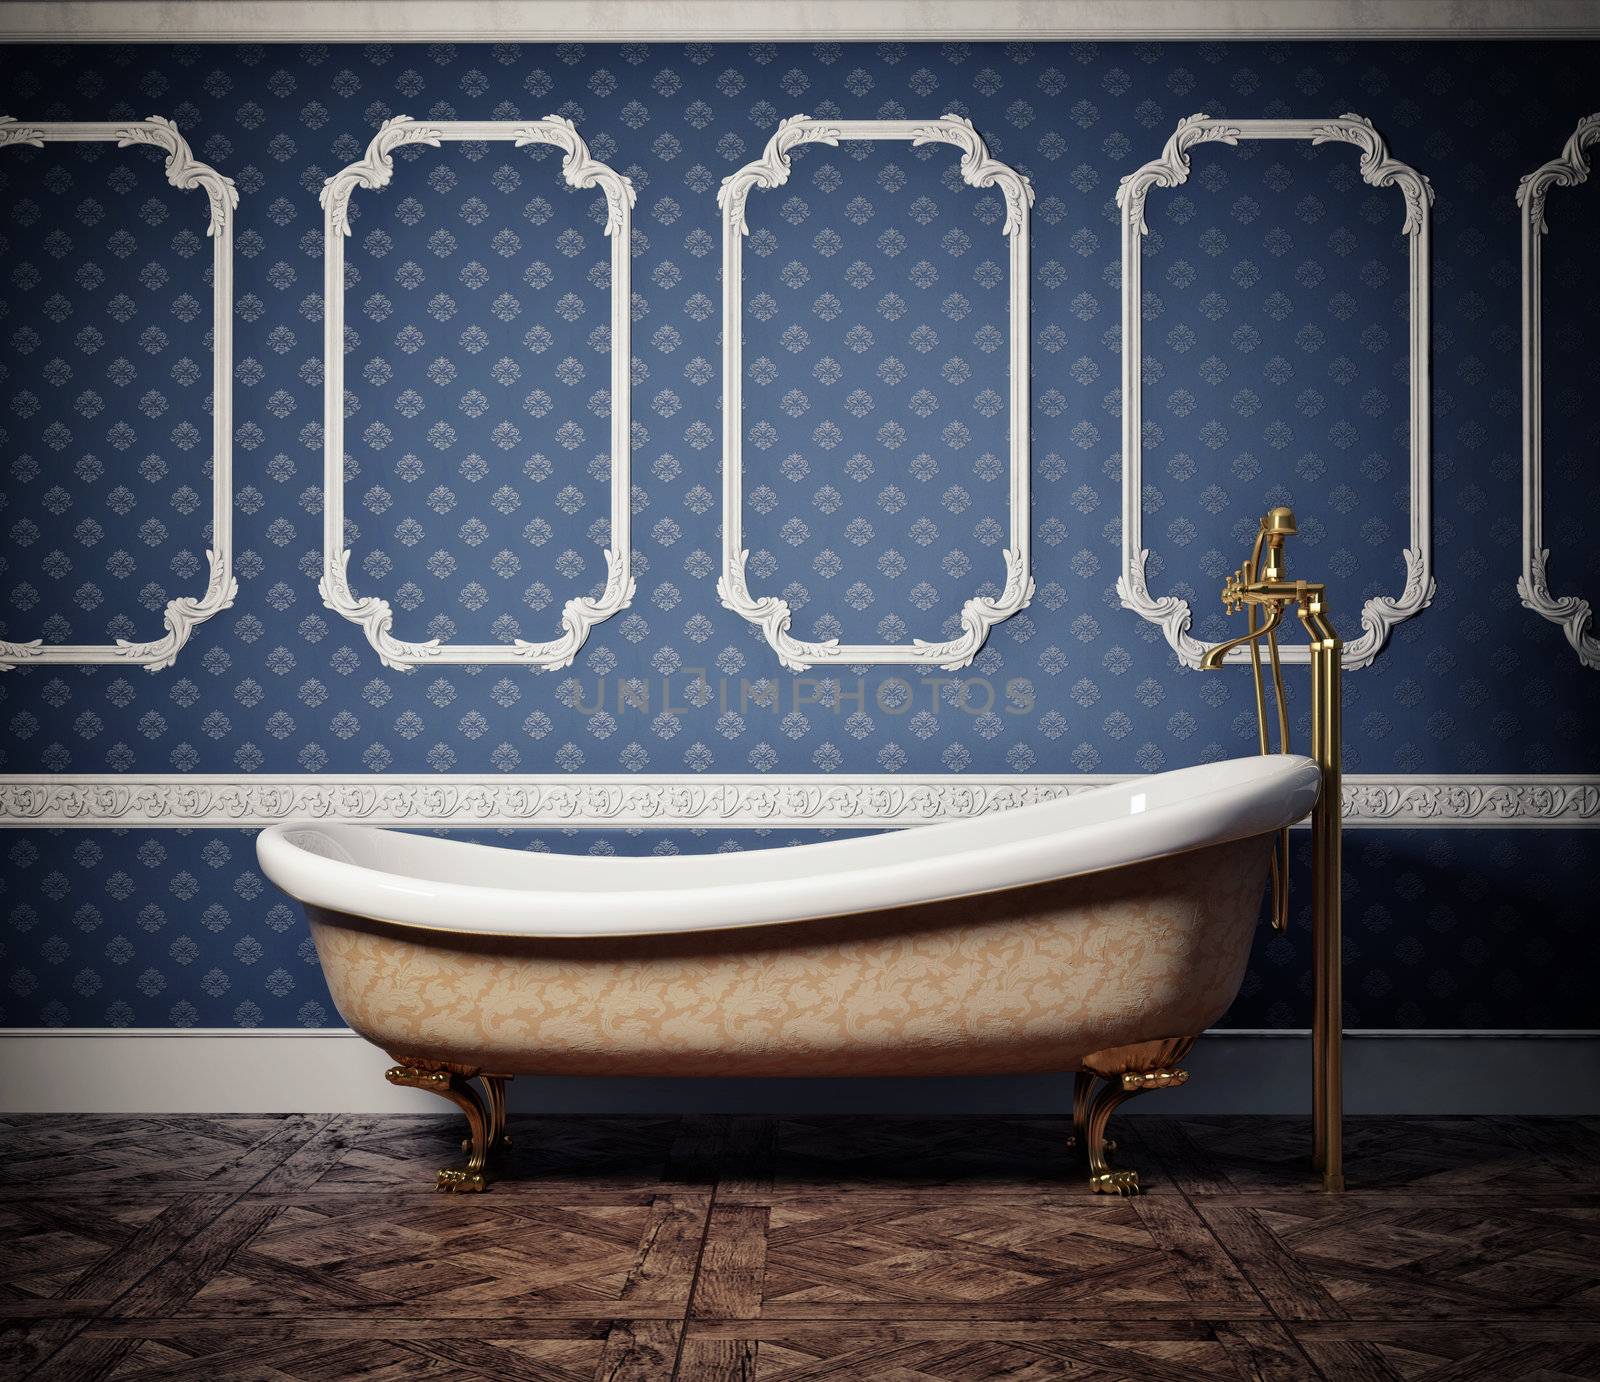 classic style bathtub ( photo and cg elements compilation)